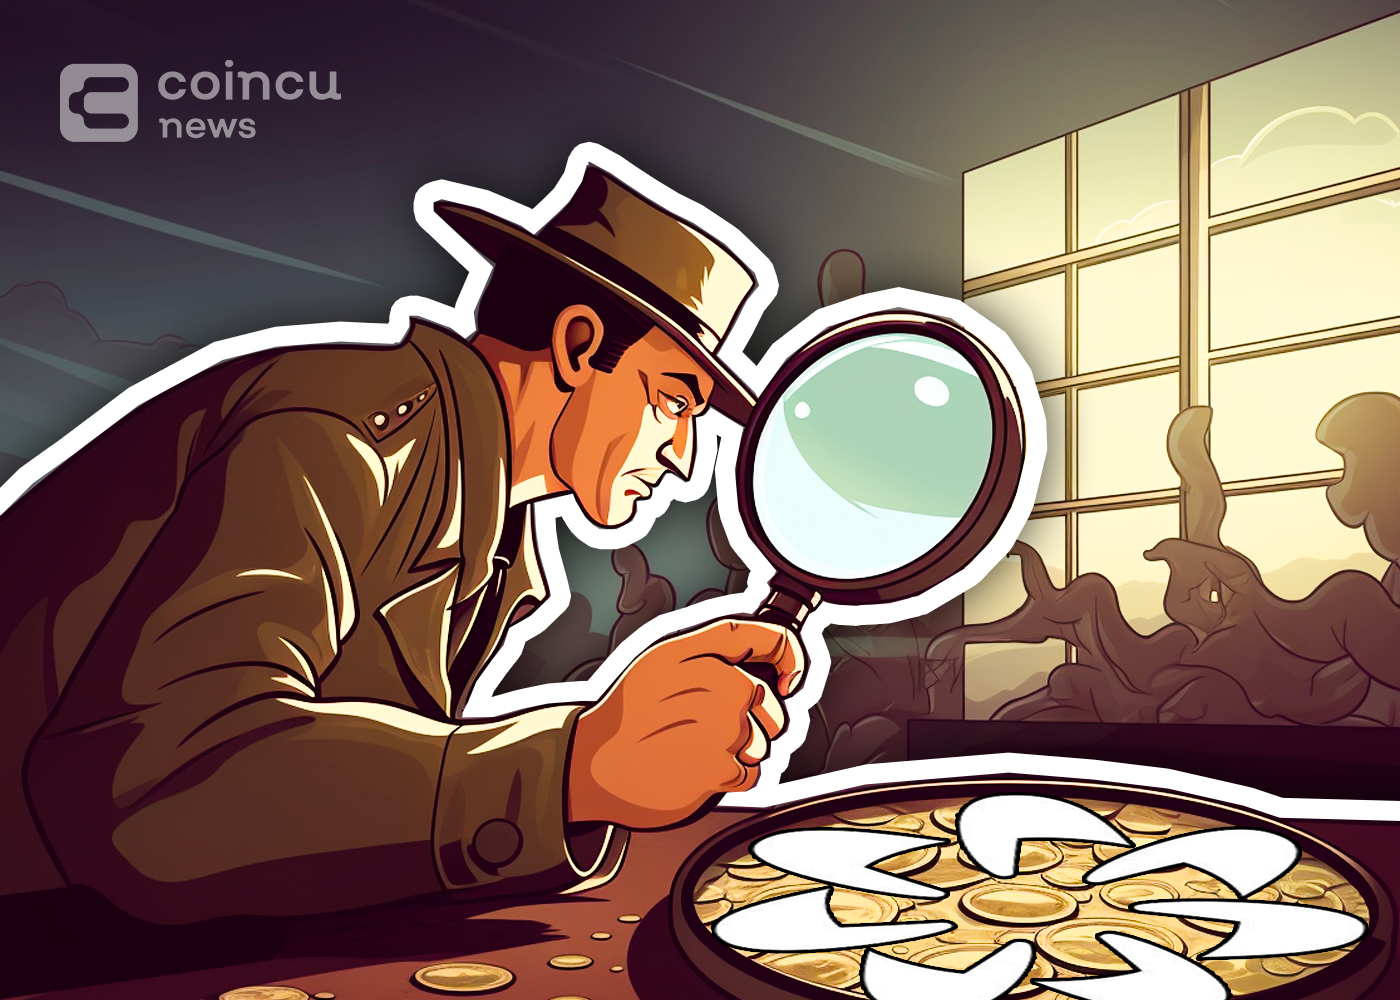 UK Data Watchdog to Investigate Worldcoin Crypto Project Over Privacy